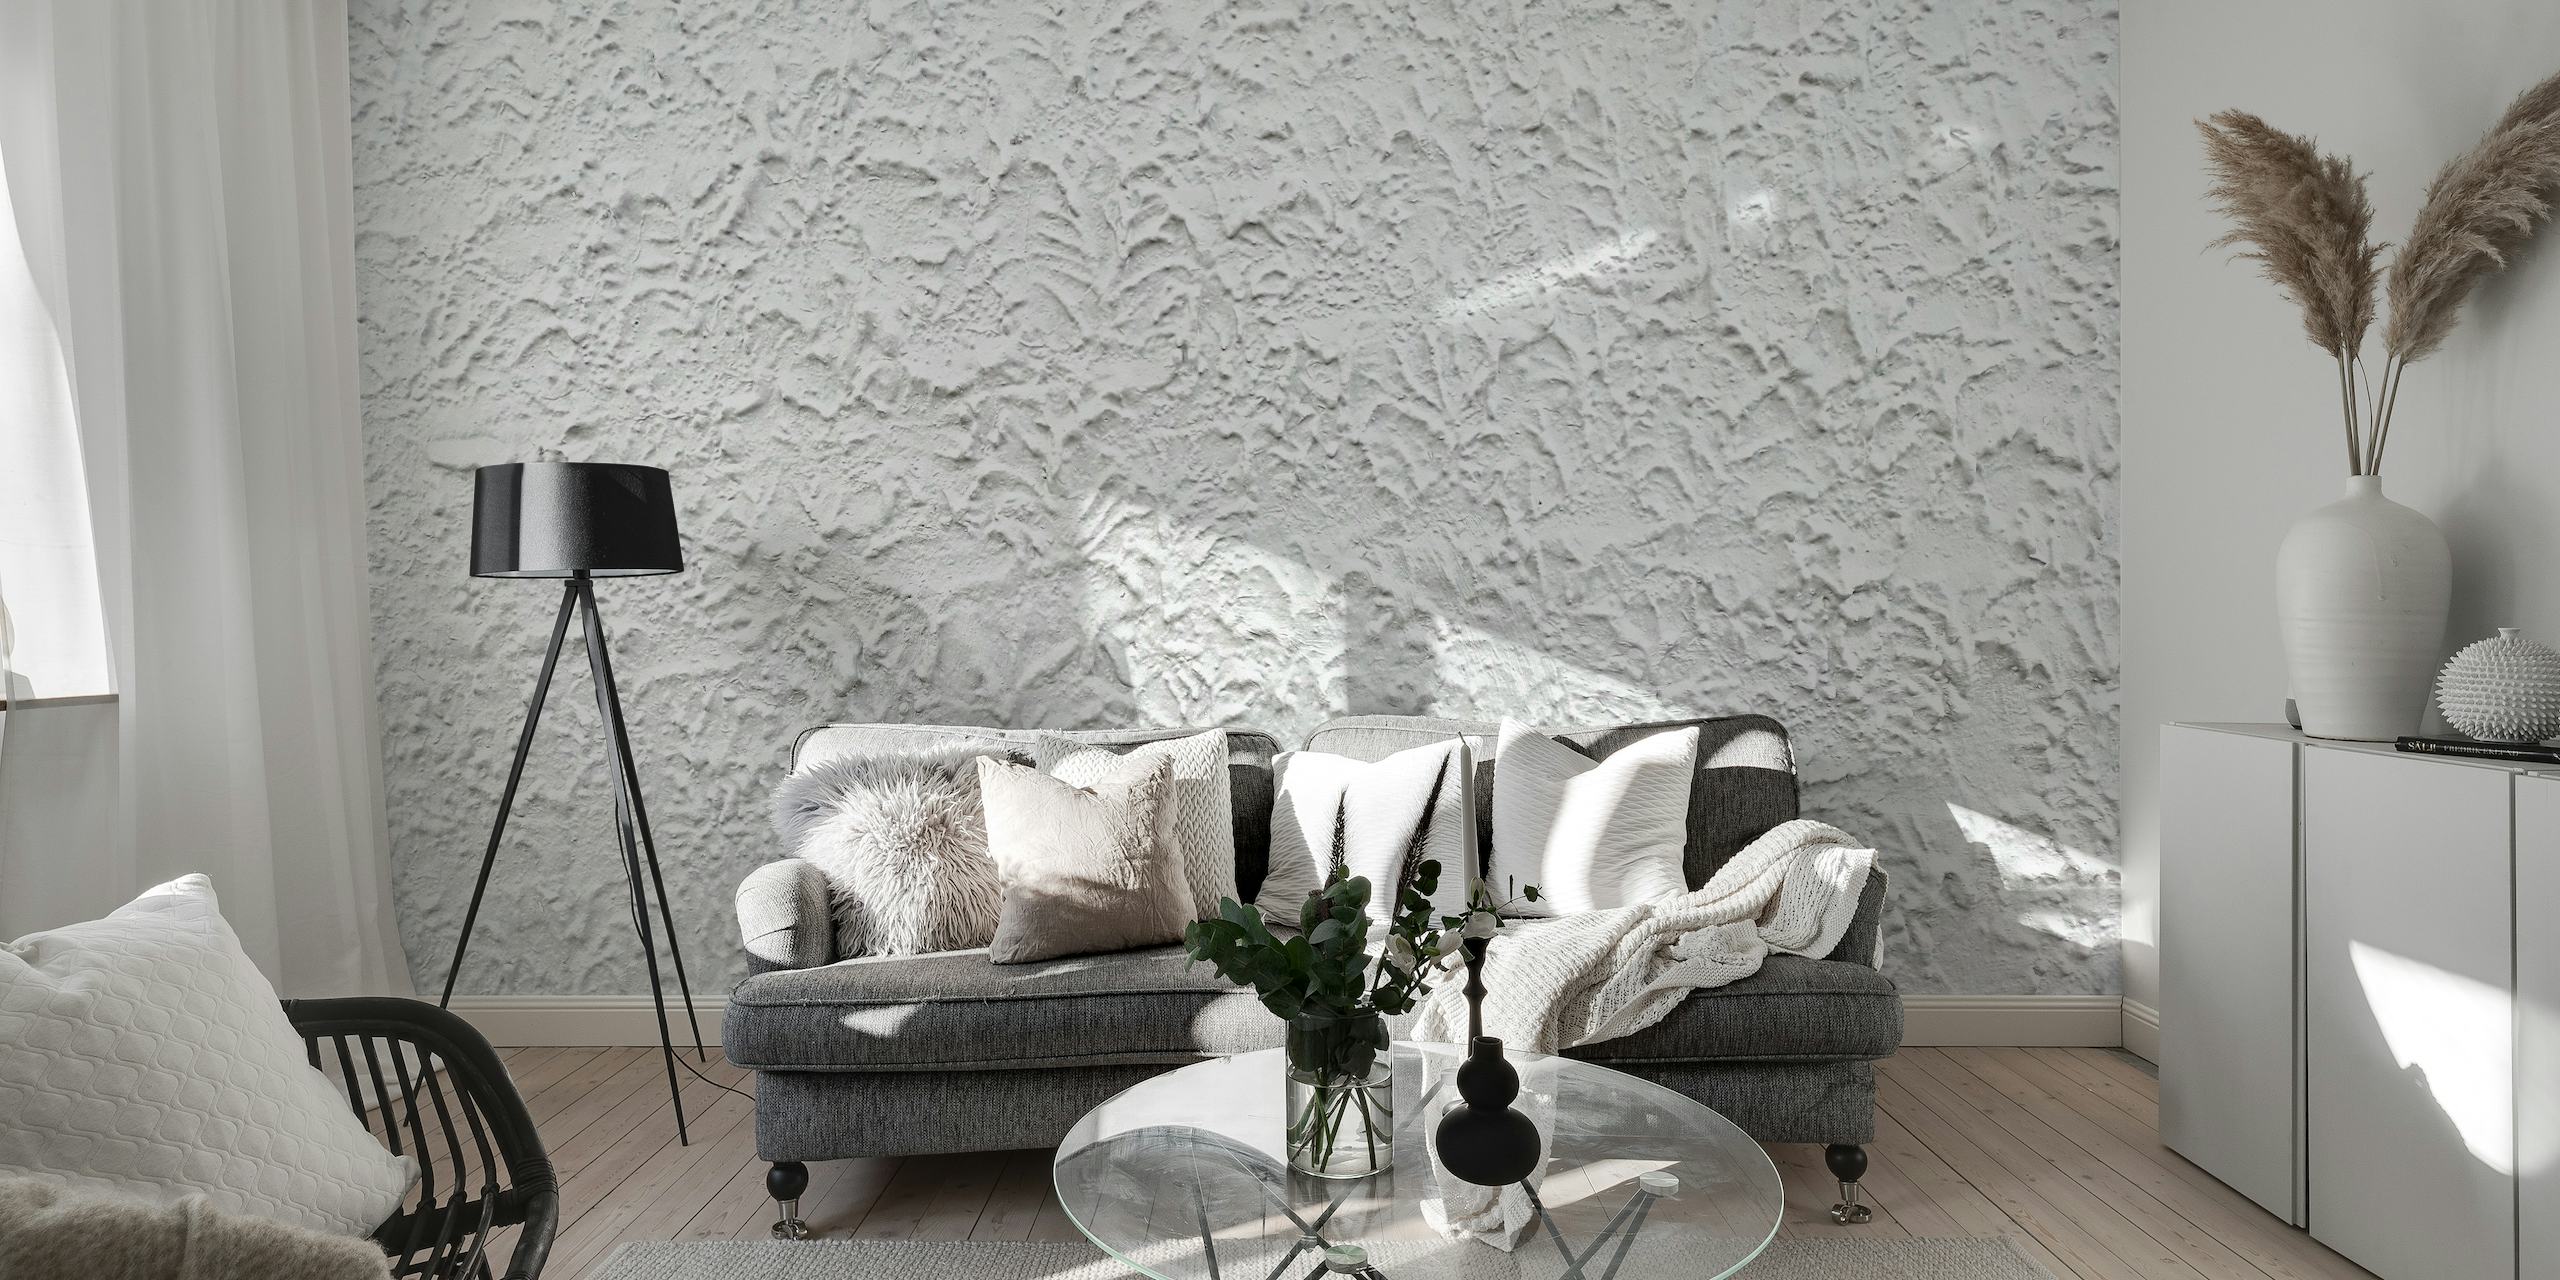 Cement Clay Art Wall Mural - an artistic blend of modern and traditional